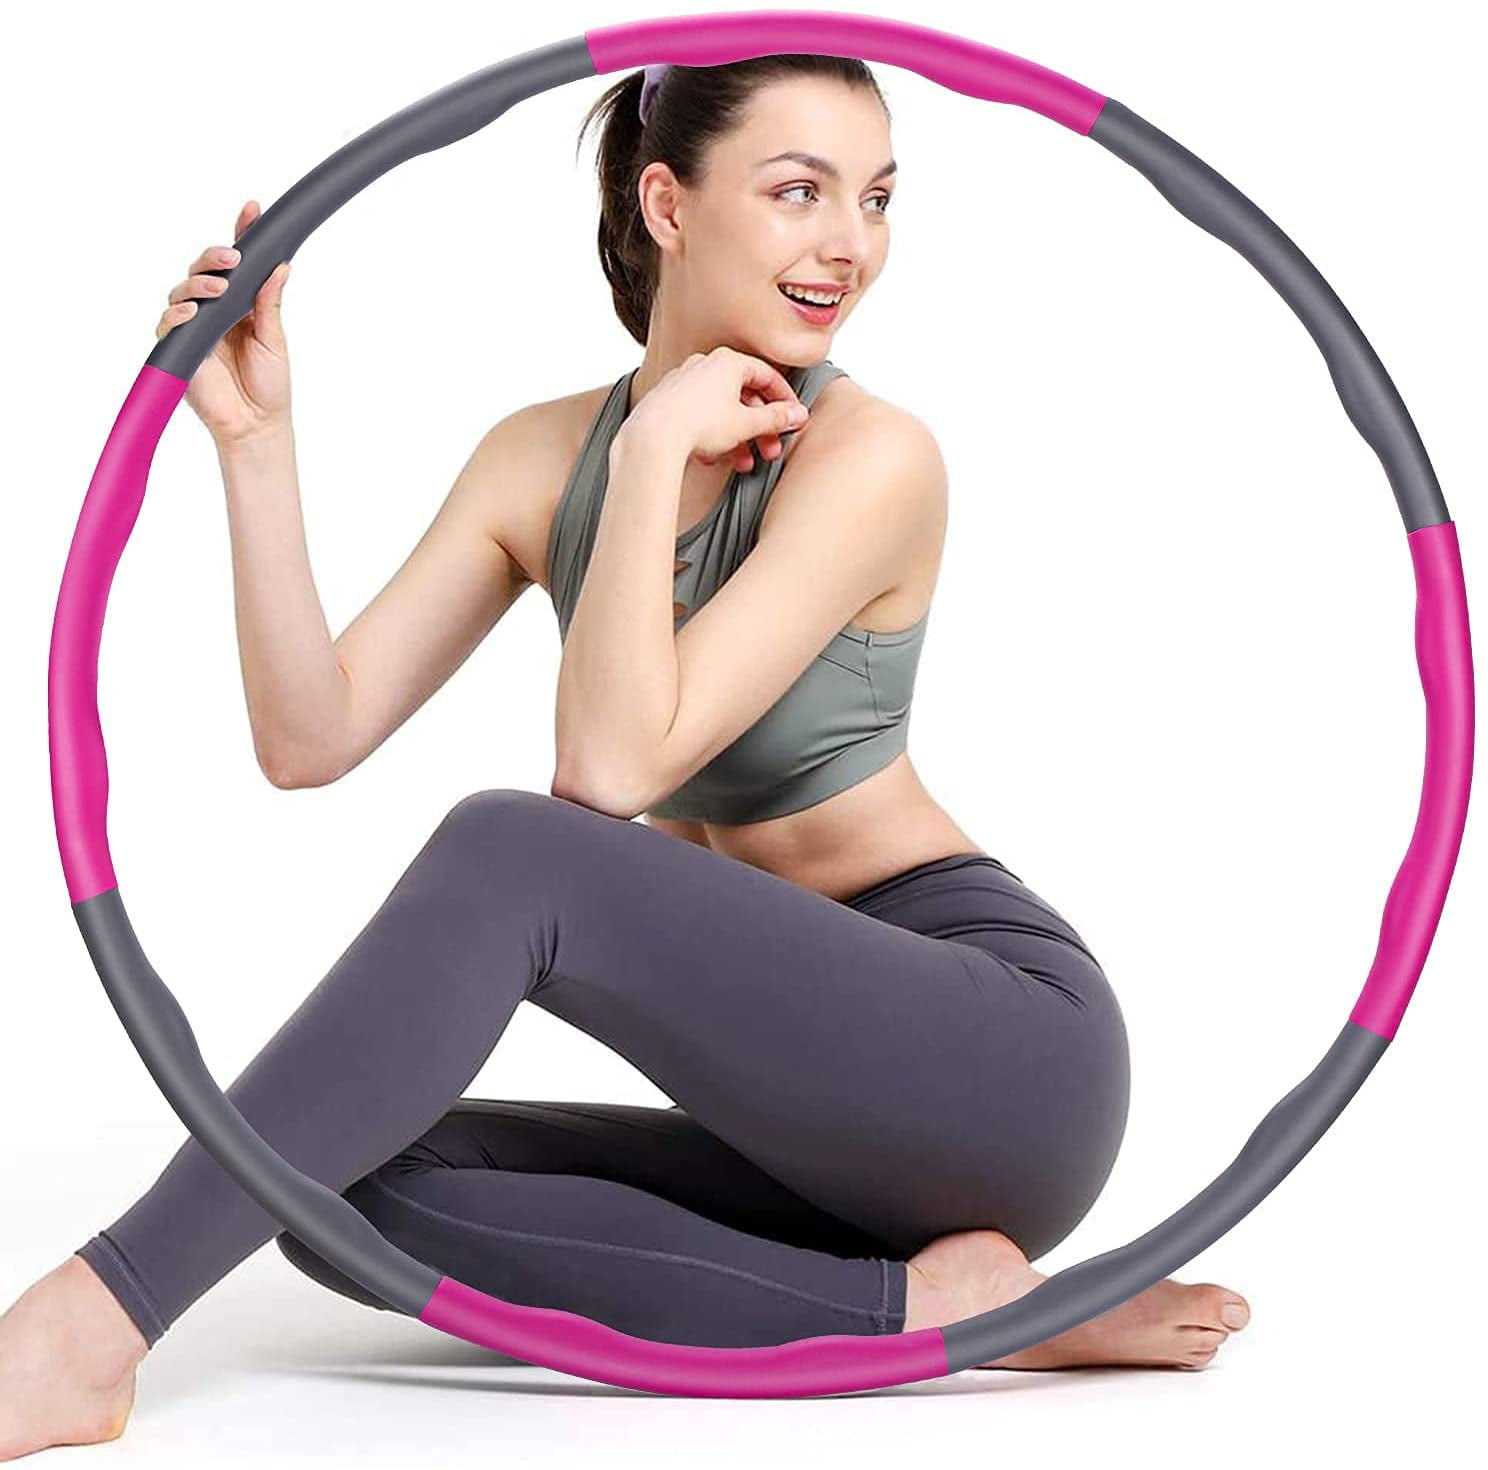 8 Sections Hula Hoop Weighted Collapsible Padded Abdominal Exercise Gym Workout 